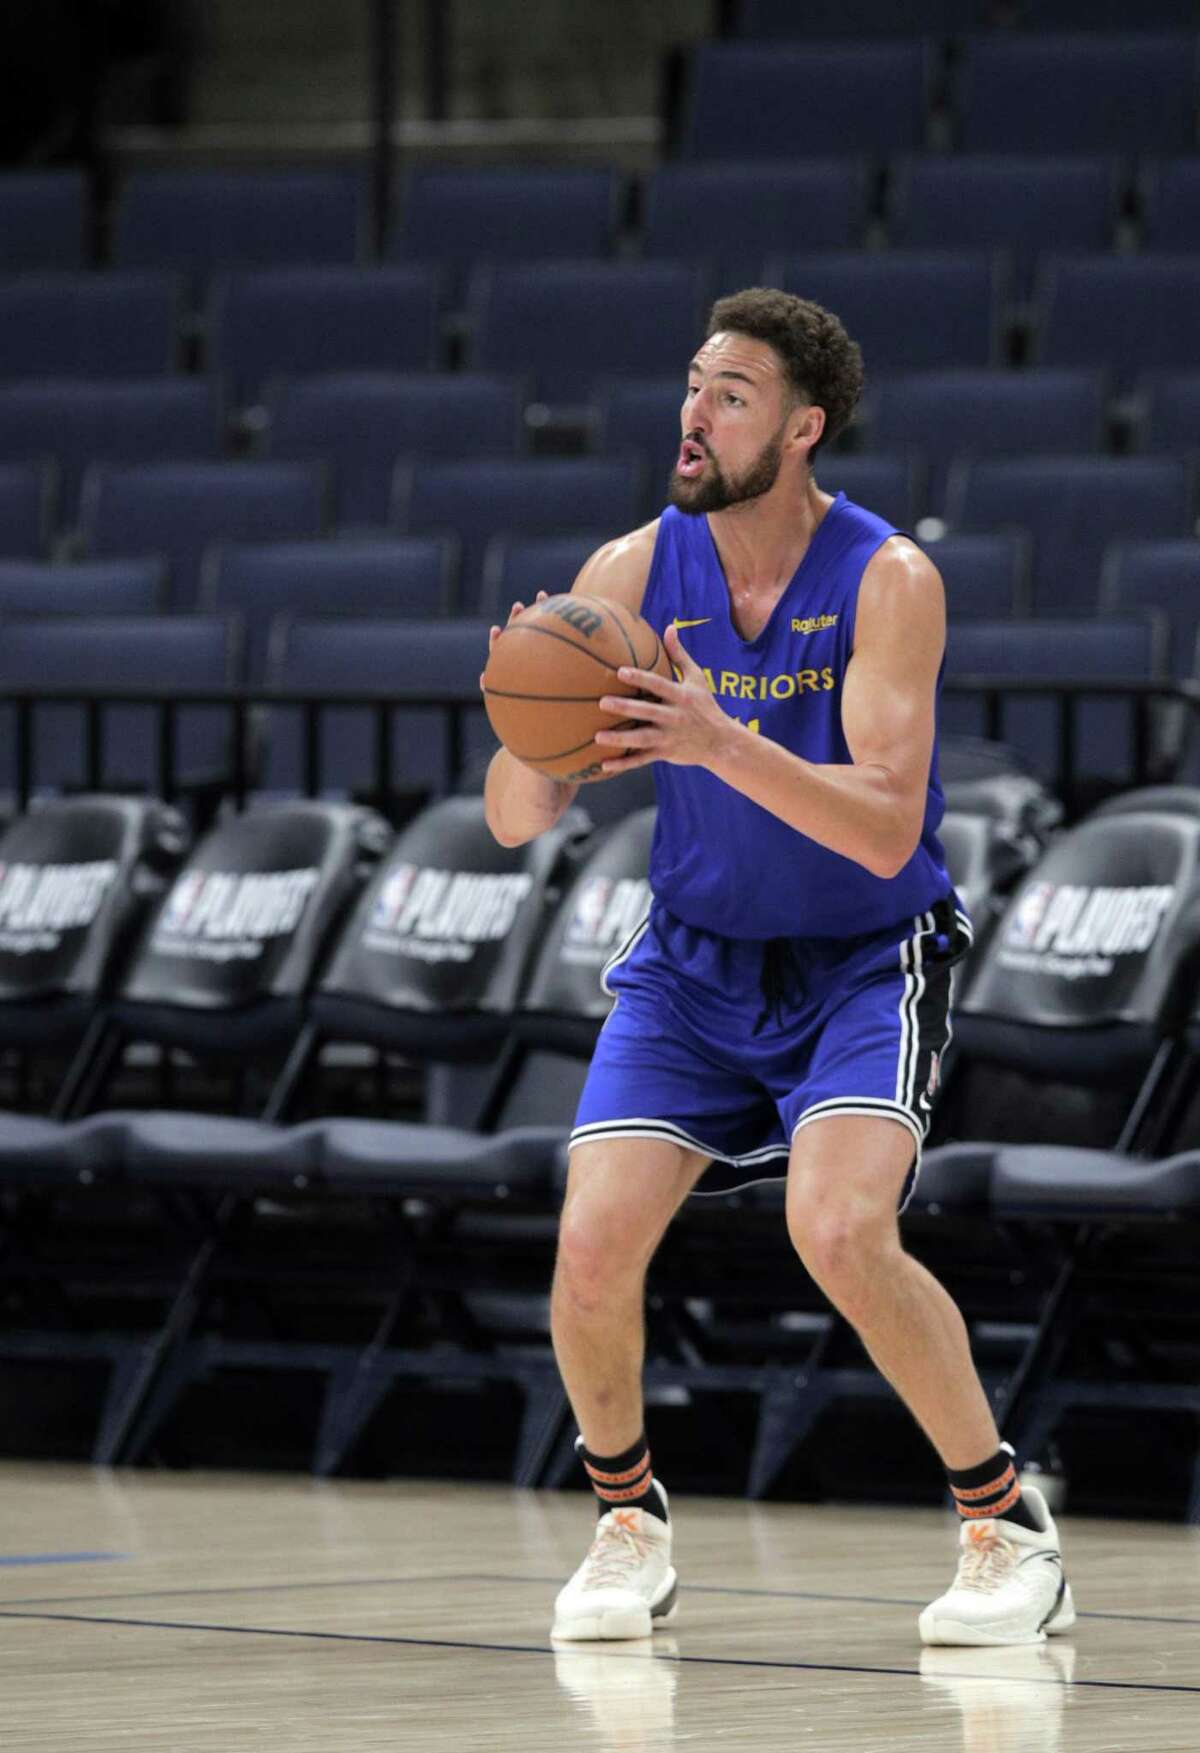 Klay Thompson practices his three point shots during an off day practice before the Golden State Warriors played the Memphis Grizzlies in Game 2 of the second round of the NBA Playoffs at Fedex Forum in Memphis, Tenn., on Monday, May 2, 2022.